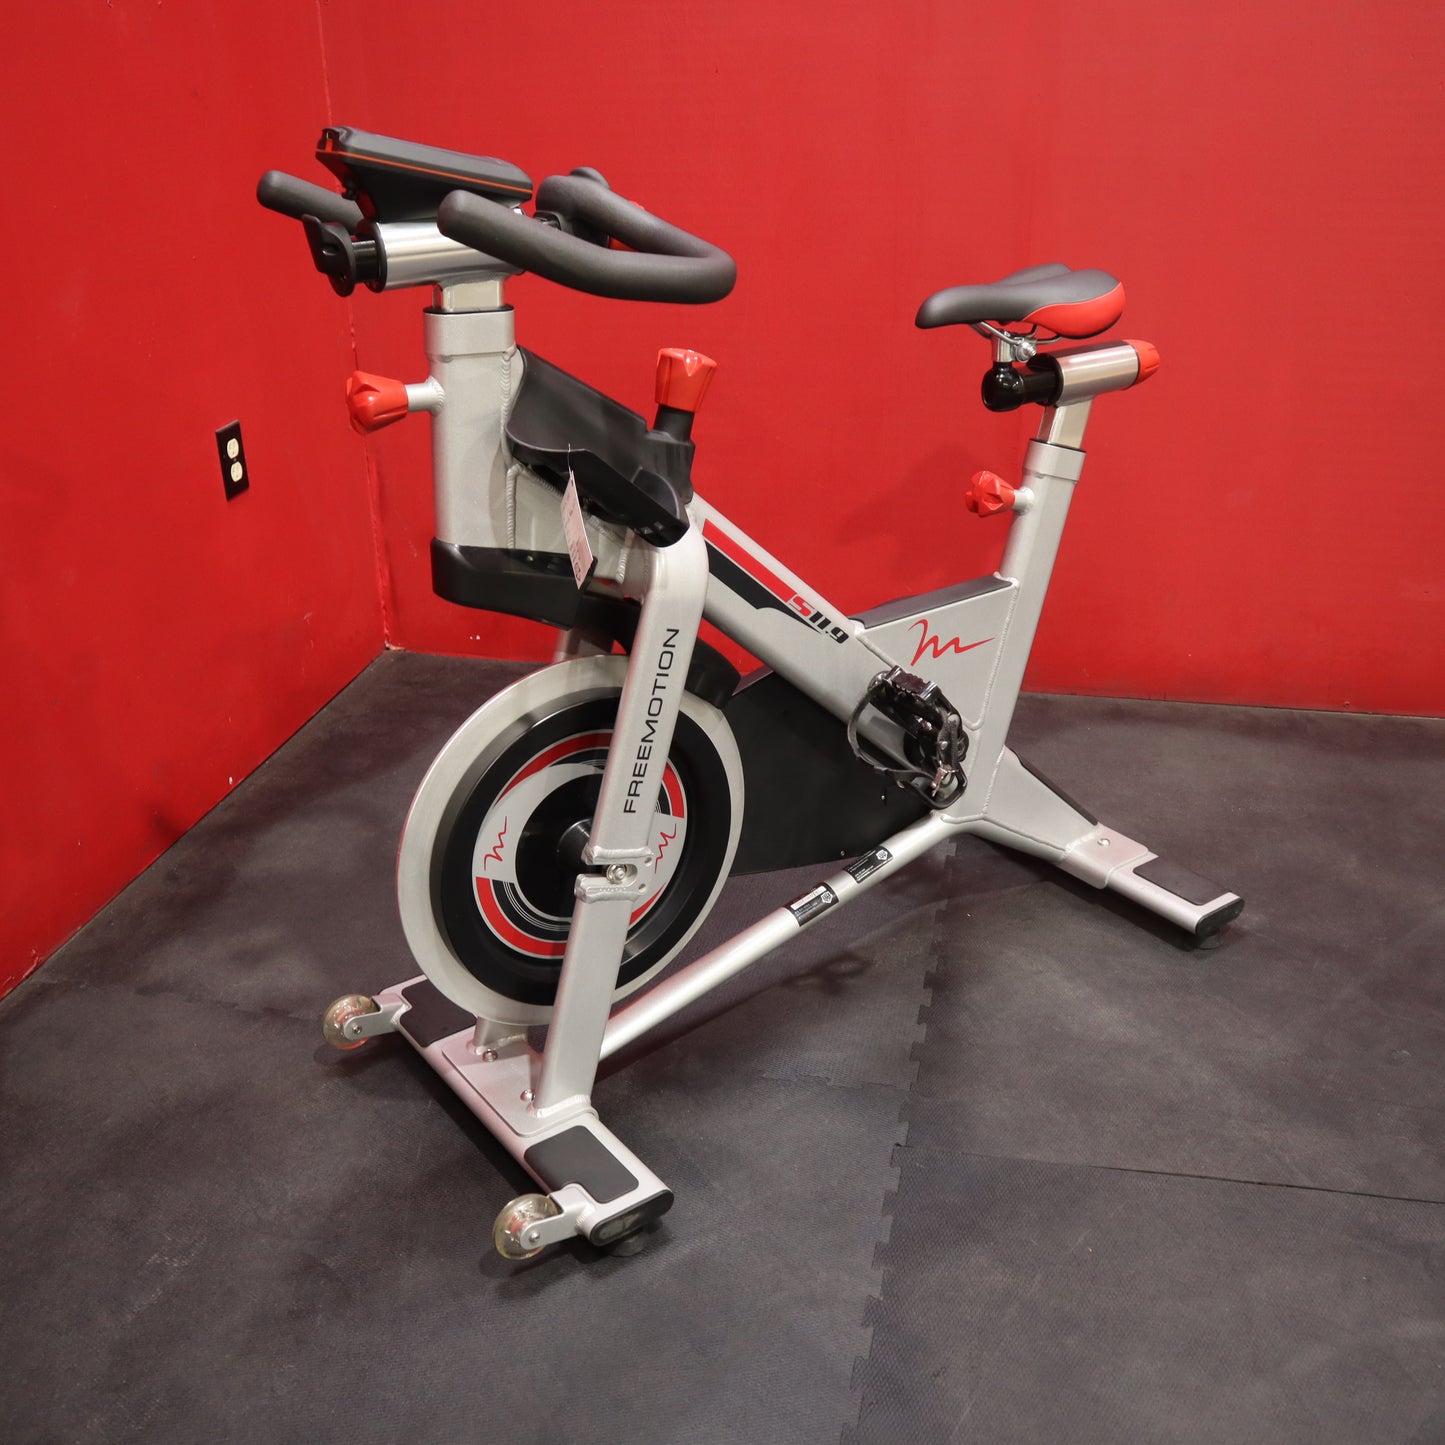 Freemotion S11.9 Chain Drive Indoor Cycle w/ Console (Refurbished)